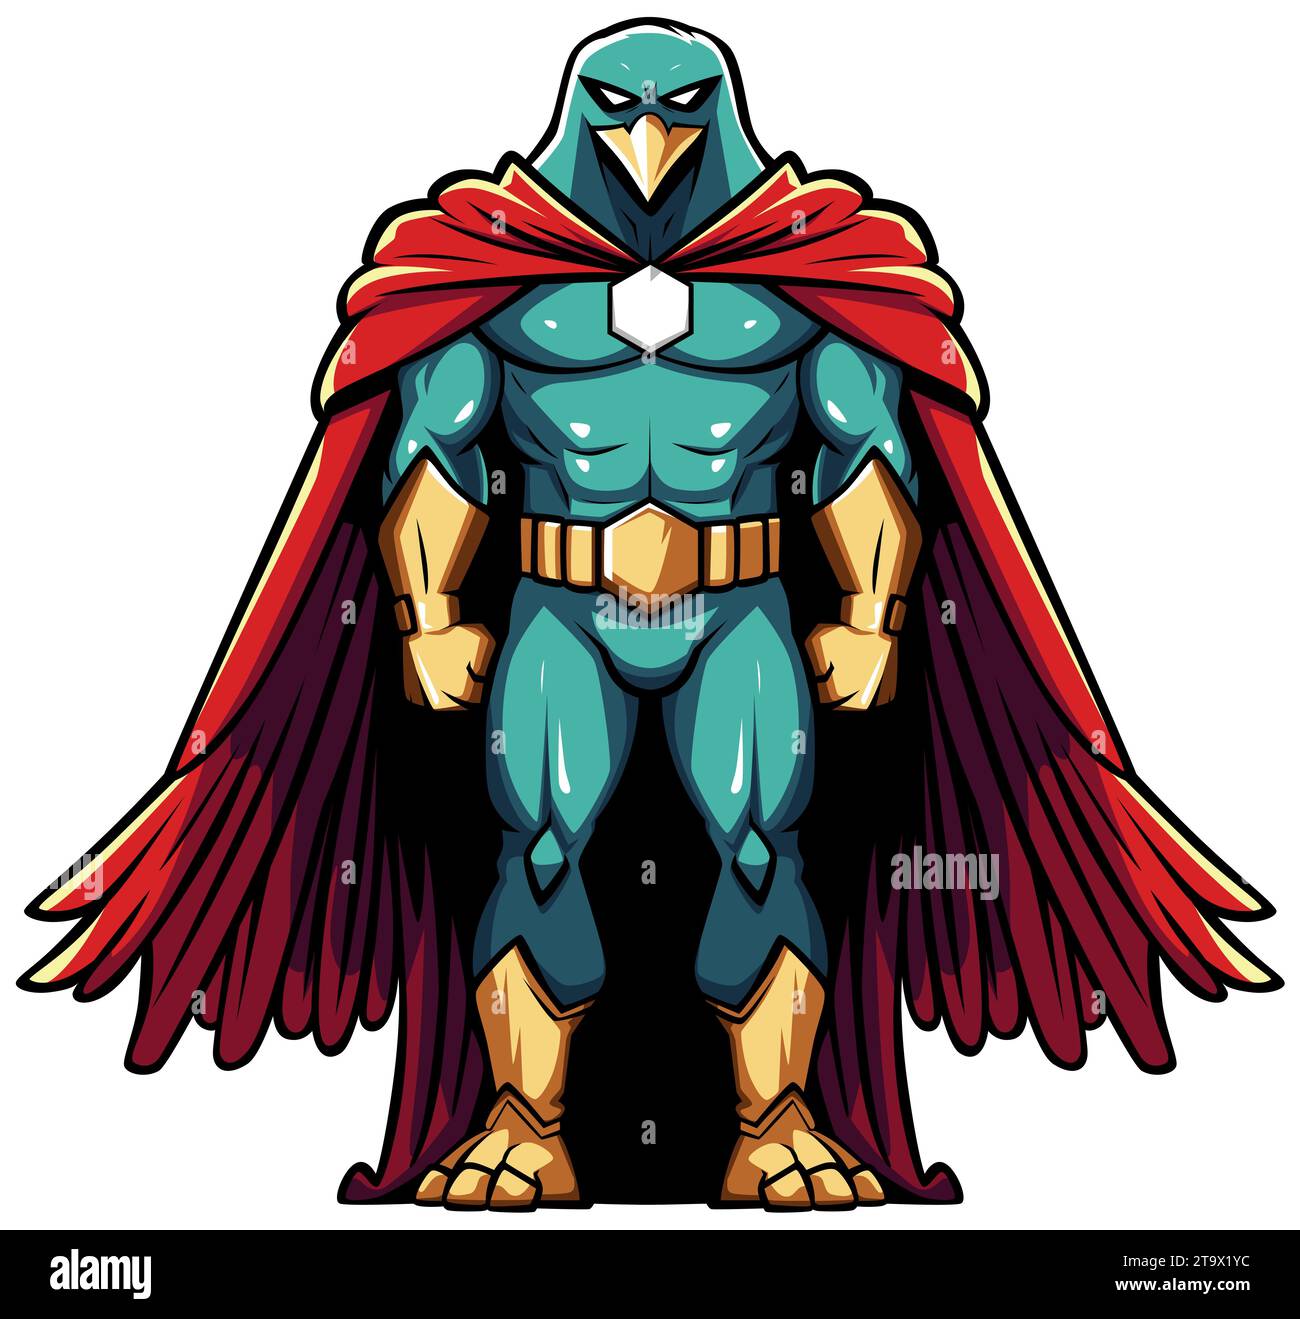 Anthropomorphic eagle character in a superhero outfit, with a teal and ...